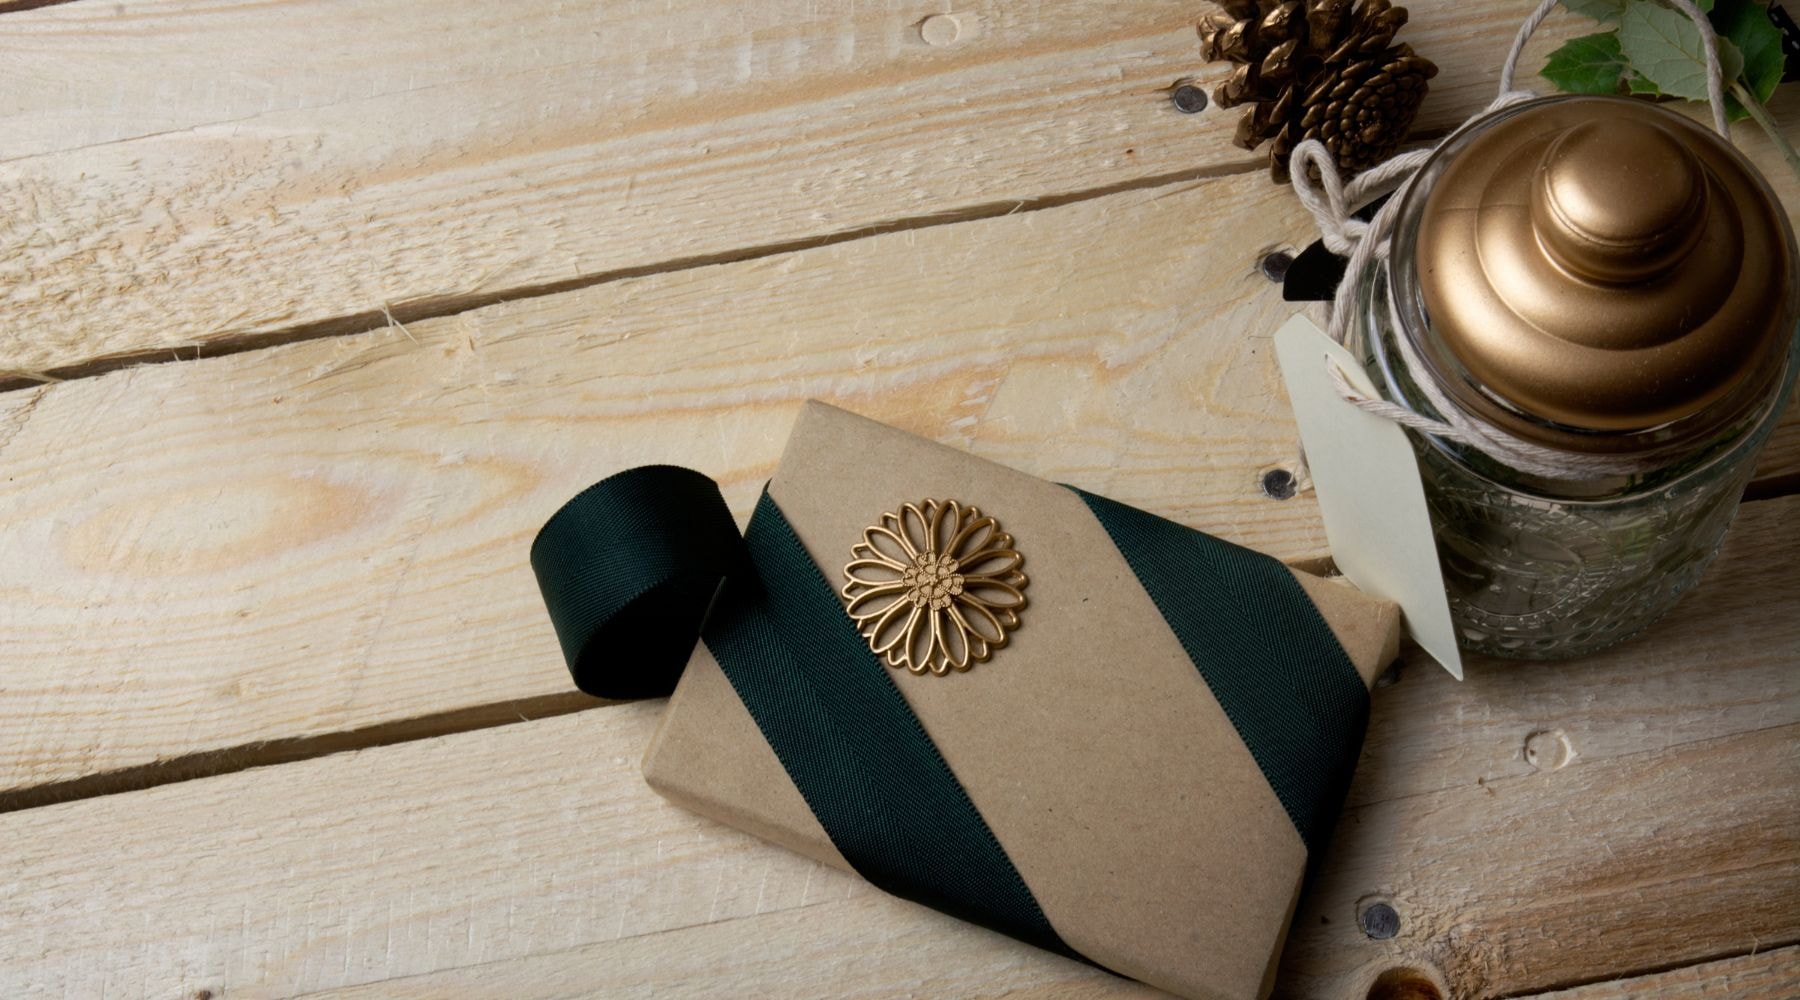 Kraft paper wrapped gift tied with a dark green ribbon and a decorative gold flower on a rustic wood background.